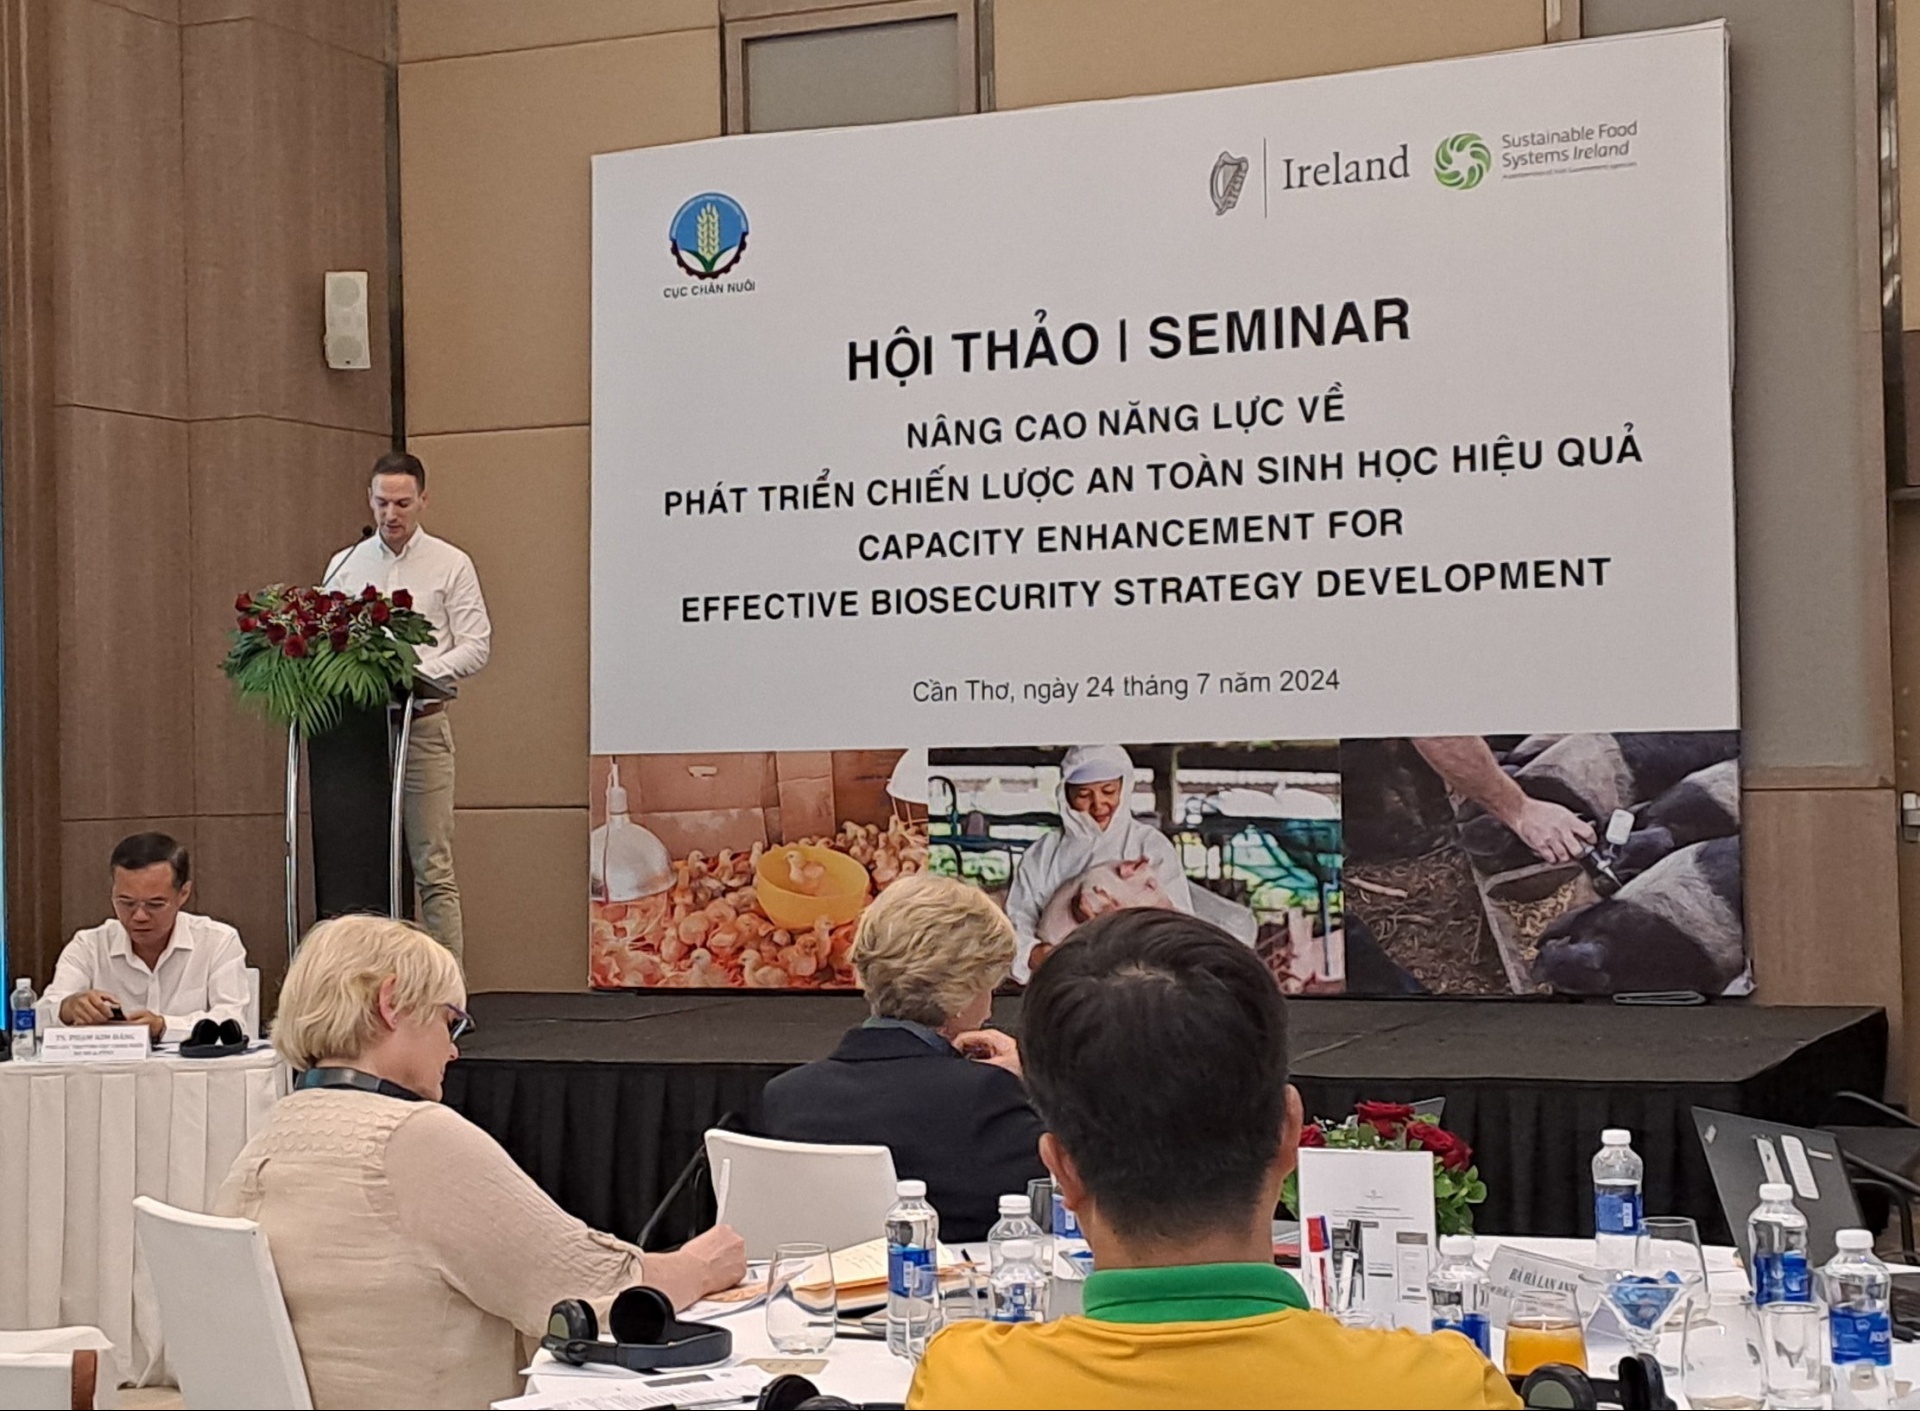 Seminars on livestock biosecurity to be held in Can Tho and Hanoi